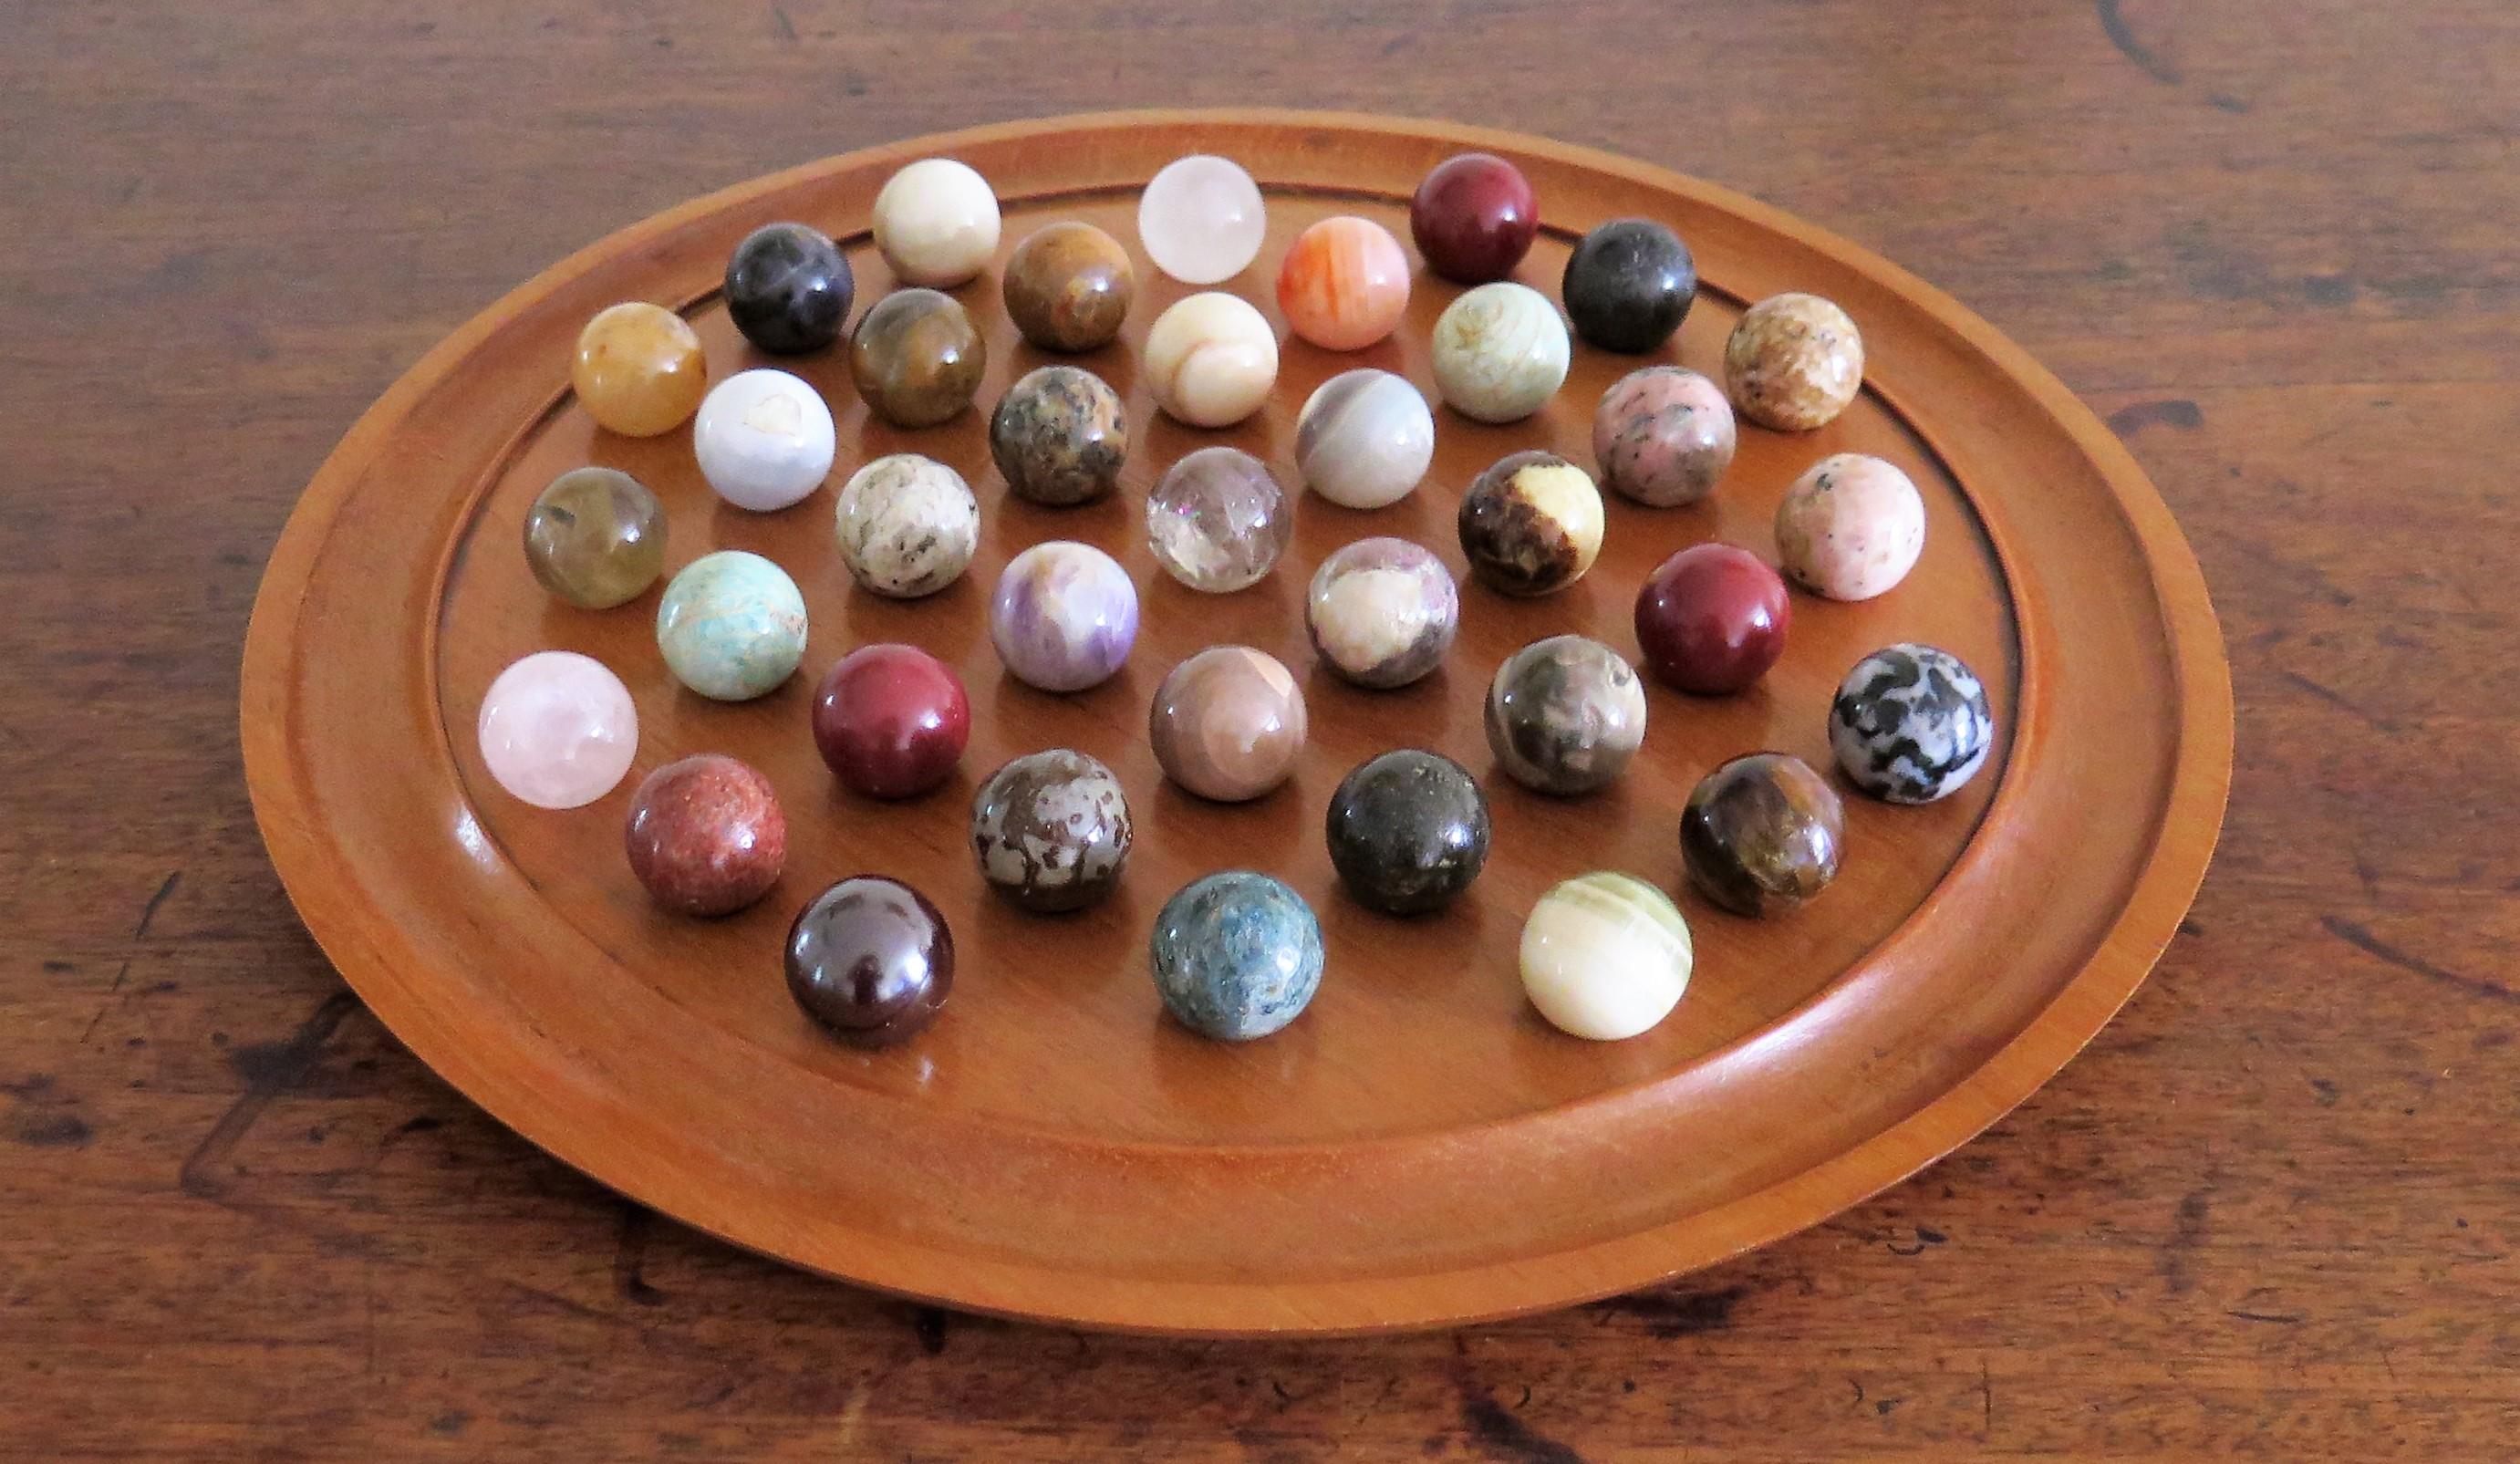 English Large Marble Solitaire Board Game with 37 Agate Marbles, Late 19th Century